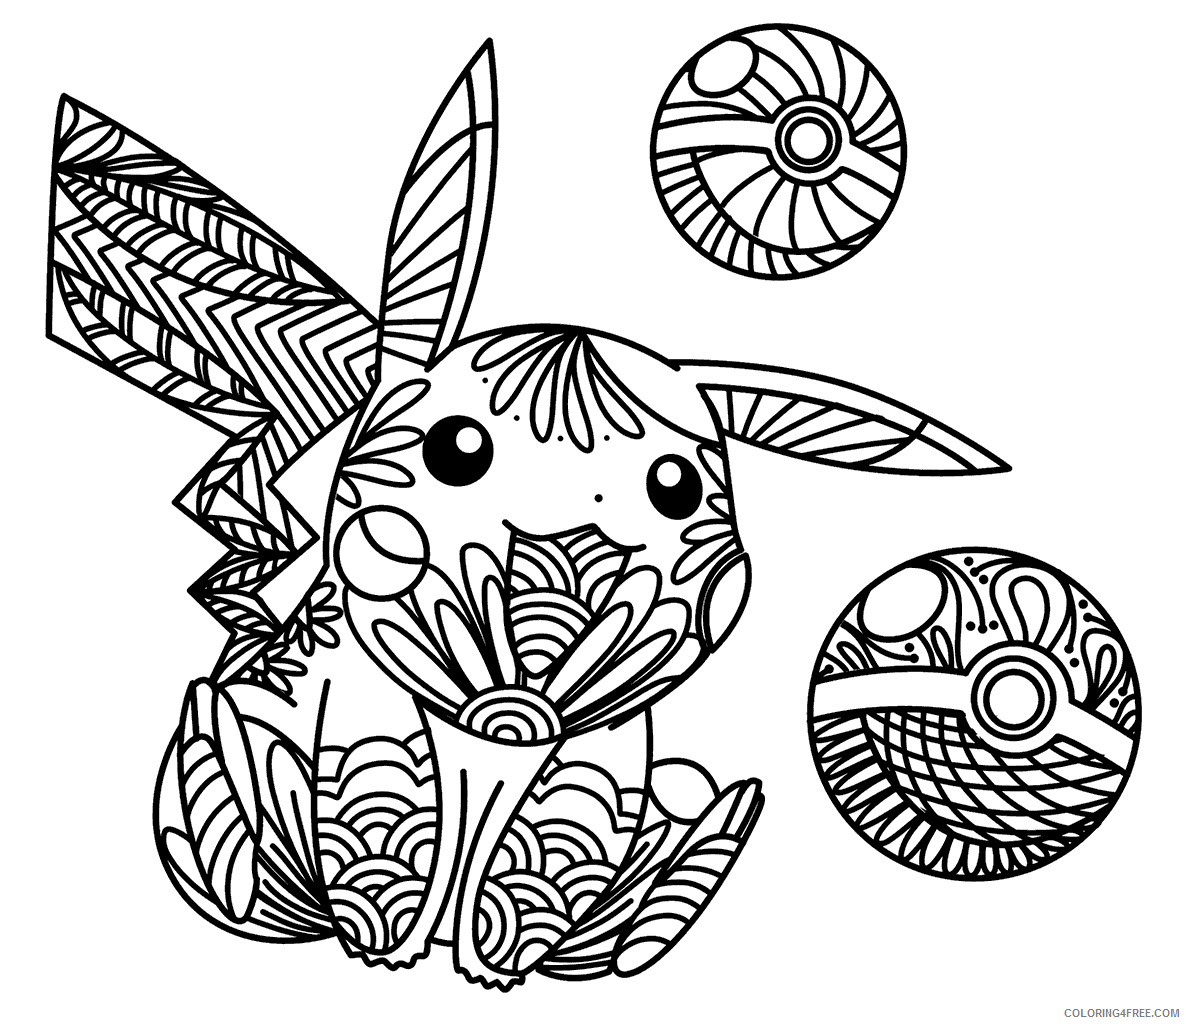 Pikachu Printable Coloring Pages Anime Zen Pikachu 2021 0965 Coloring4free